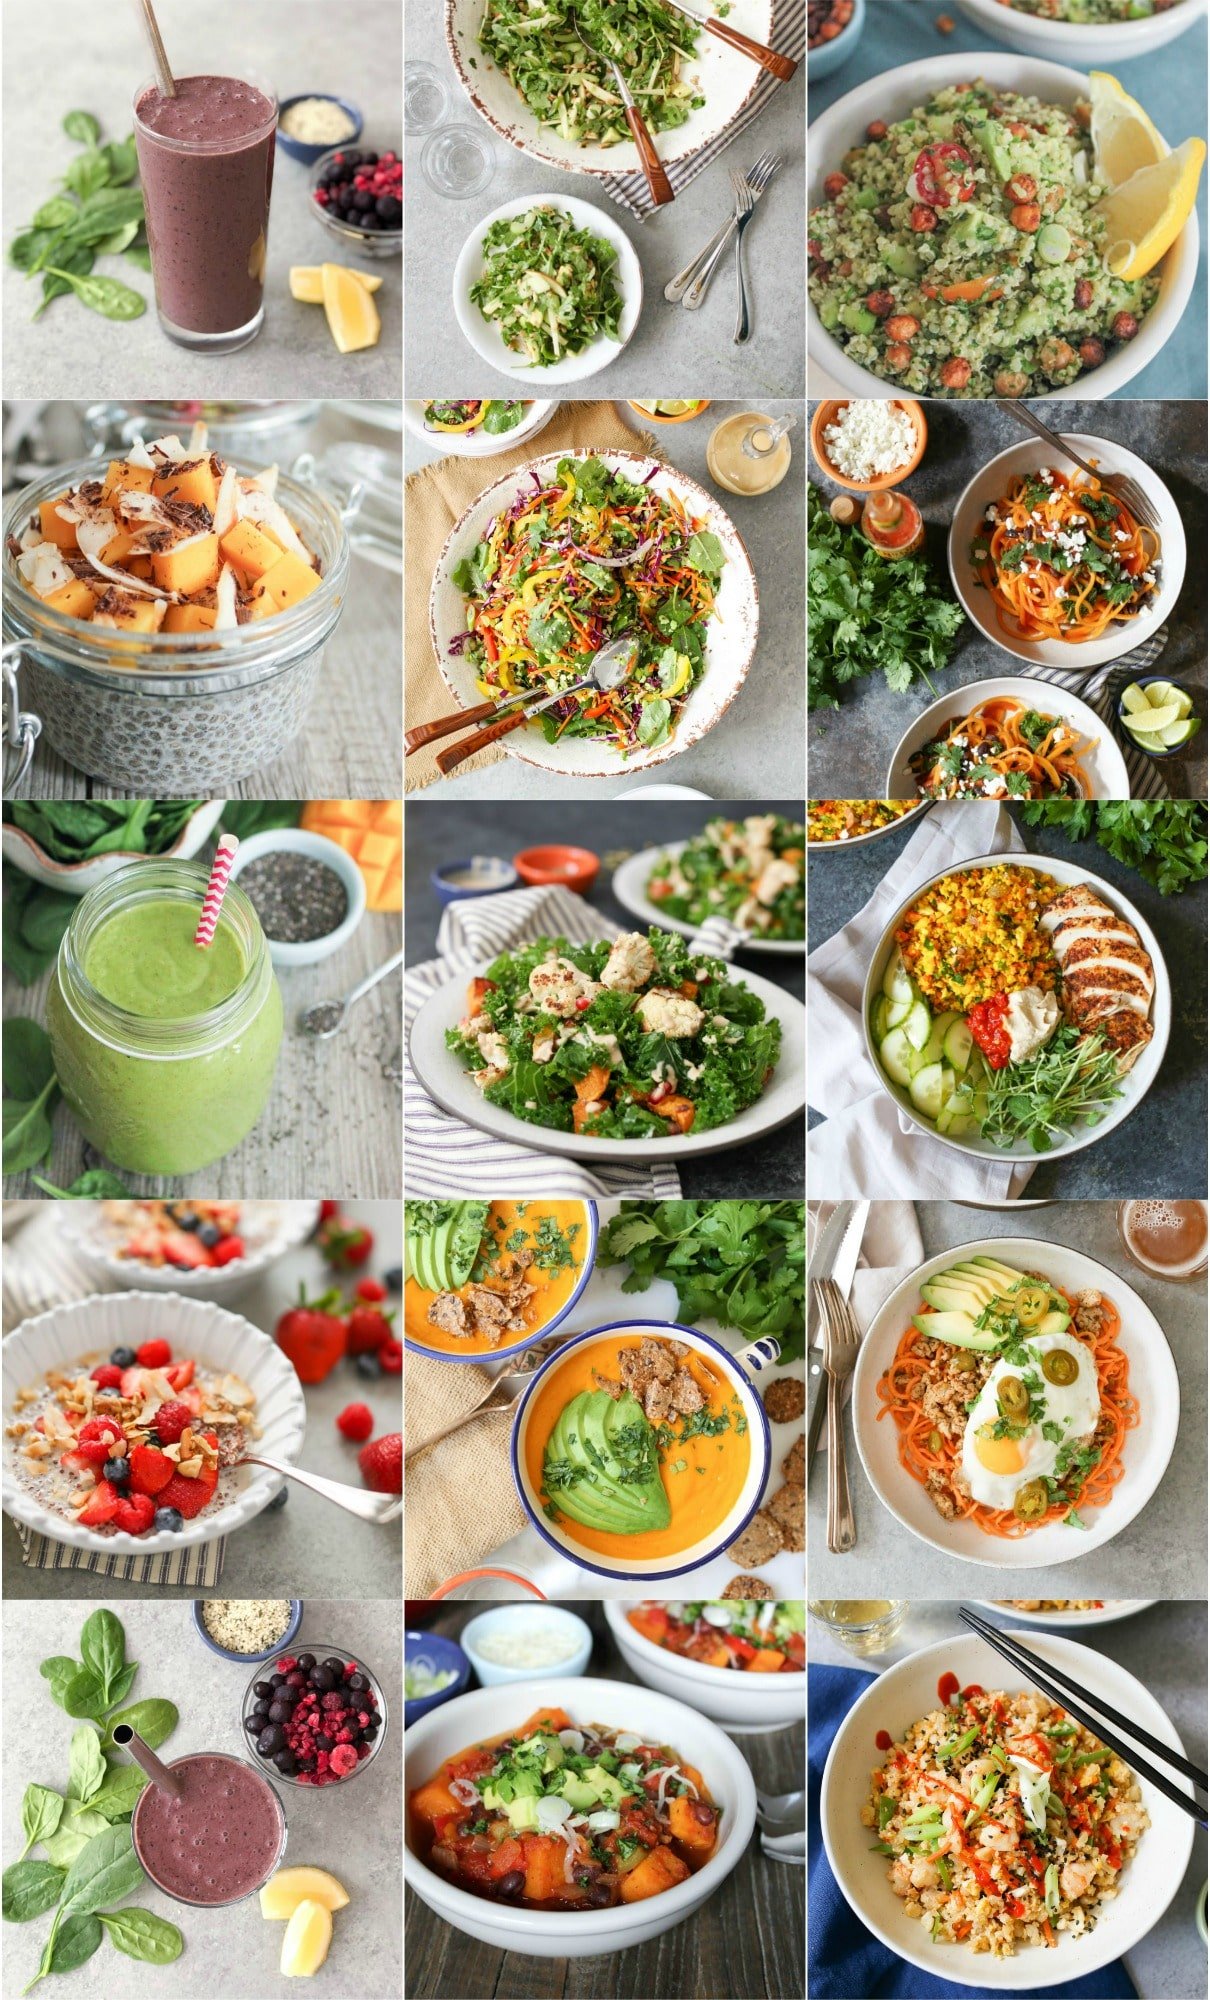 5-Day Detox Diet Plan - Cleanse Your Way To Health